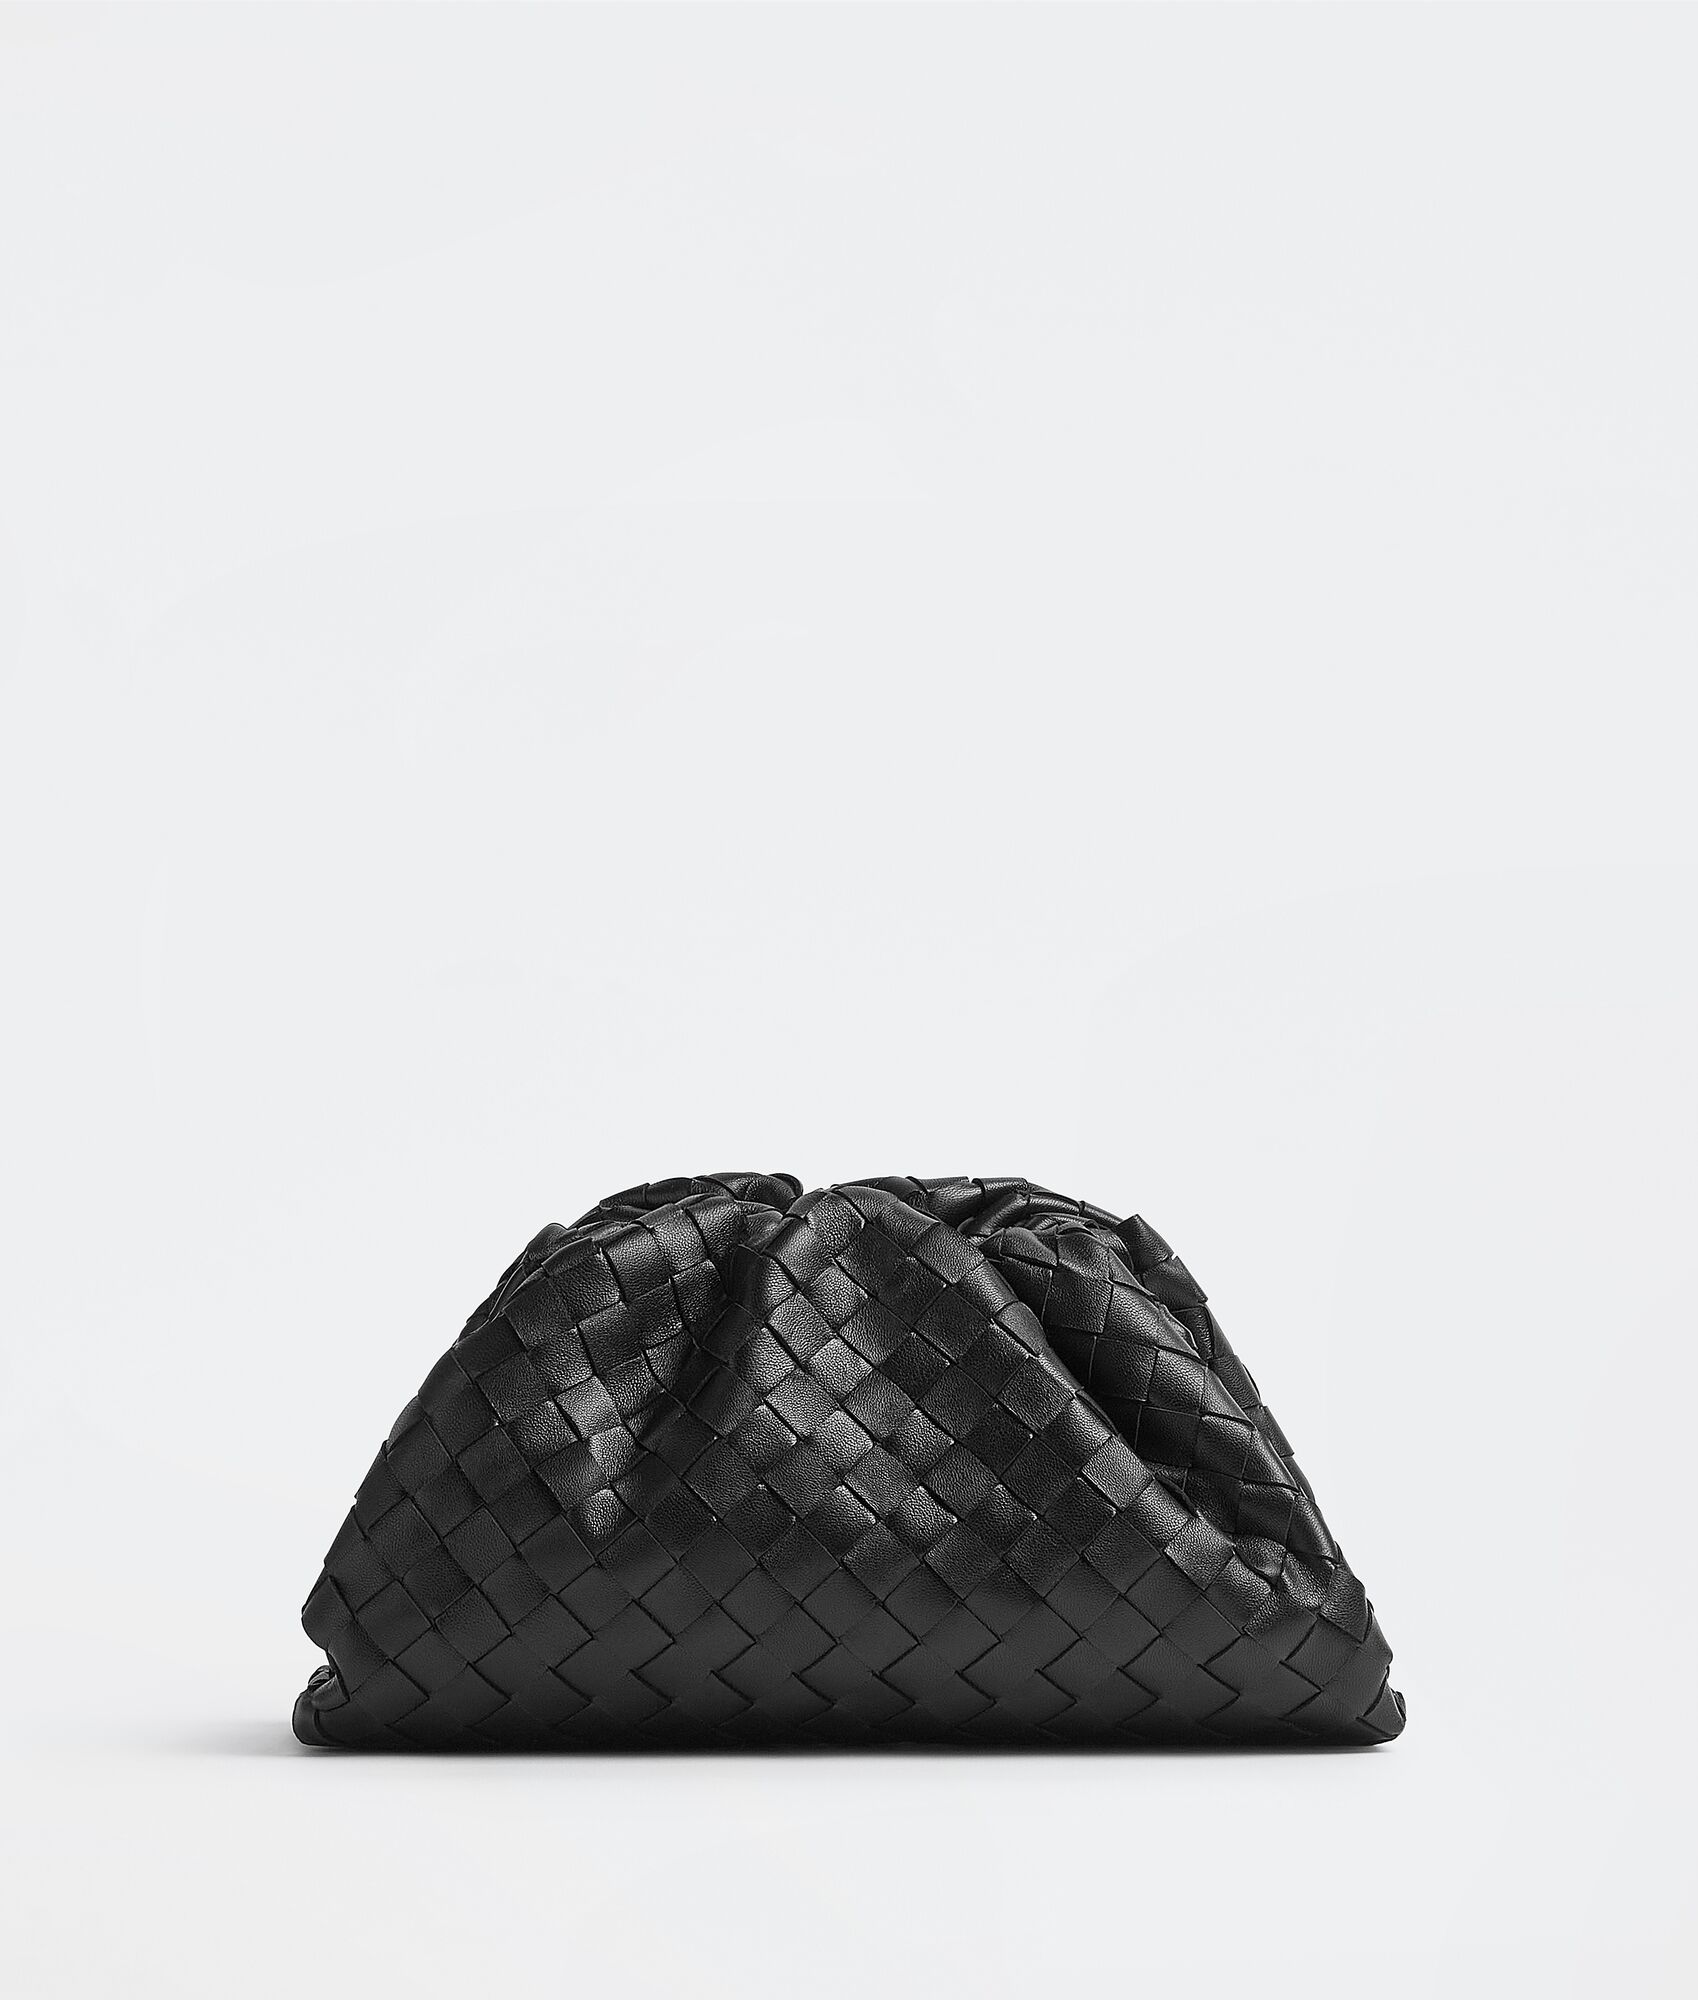 The Best Bottega Veneta Bags to Invest Your Money In | Who What Wear UK